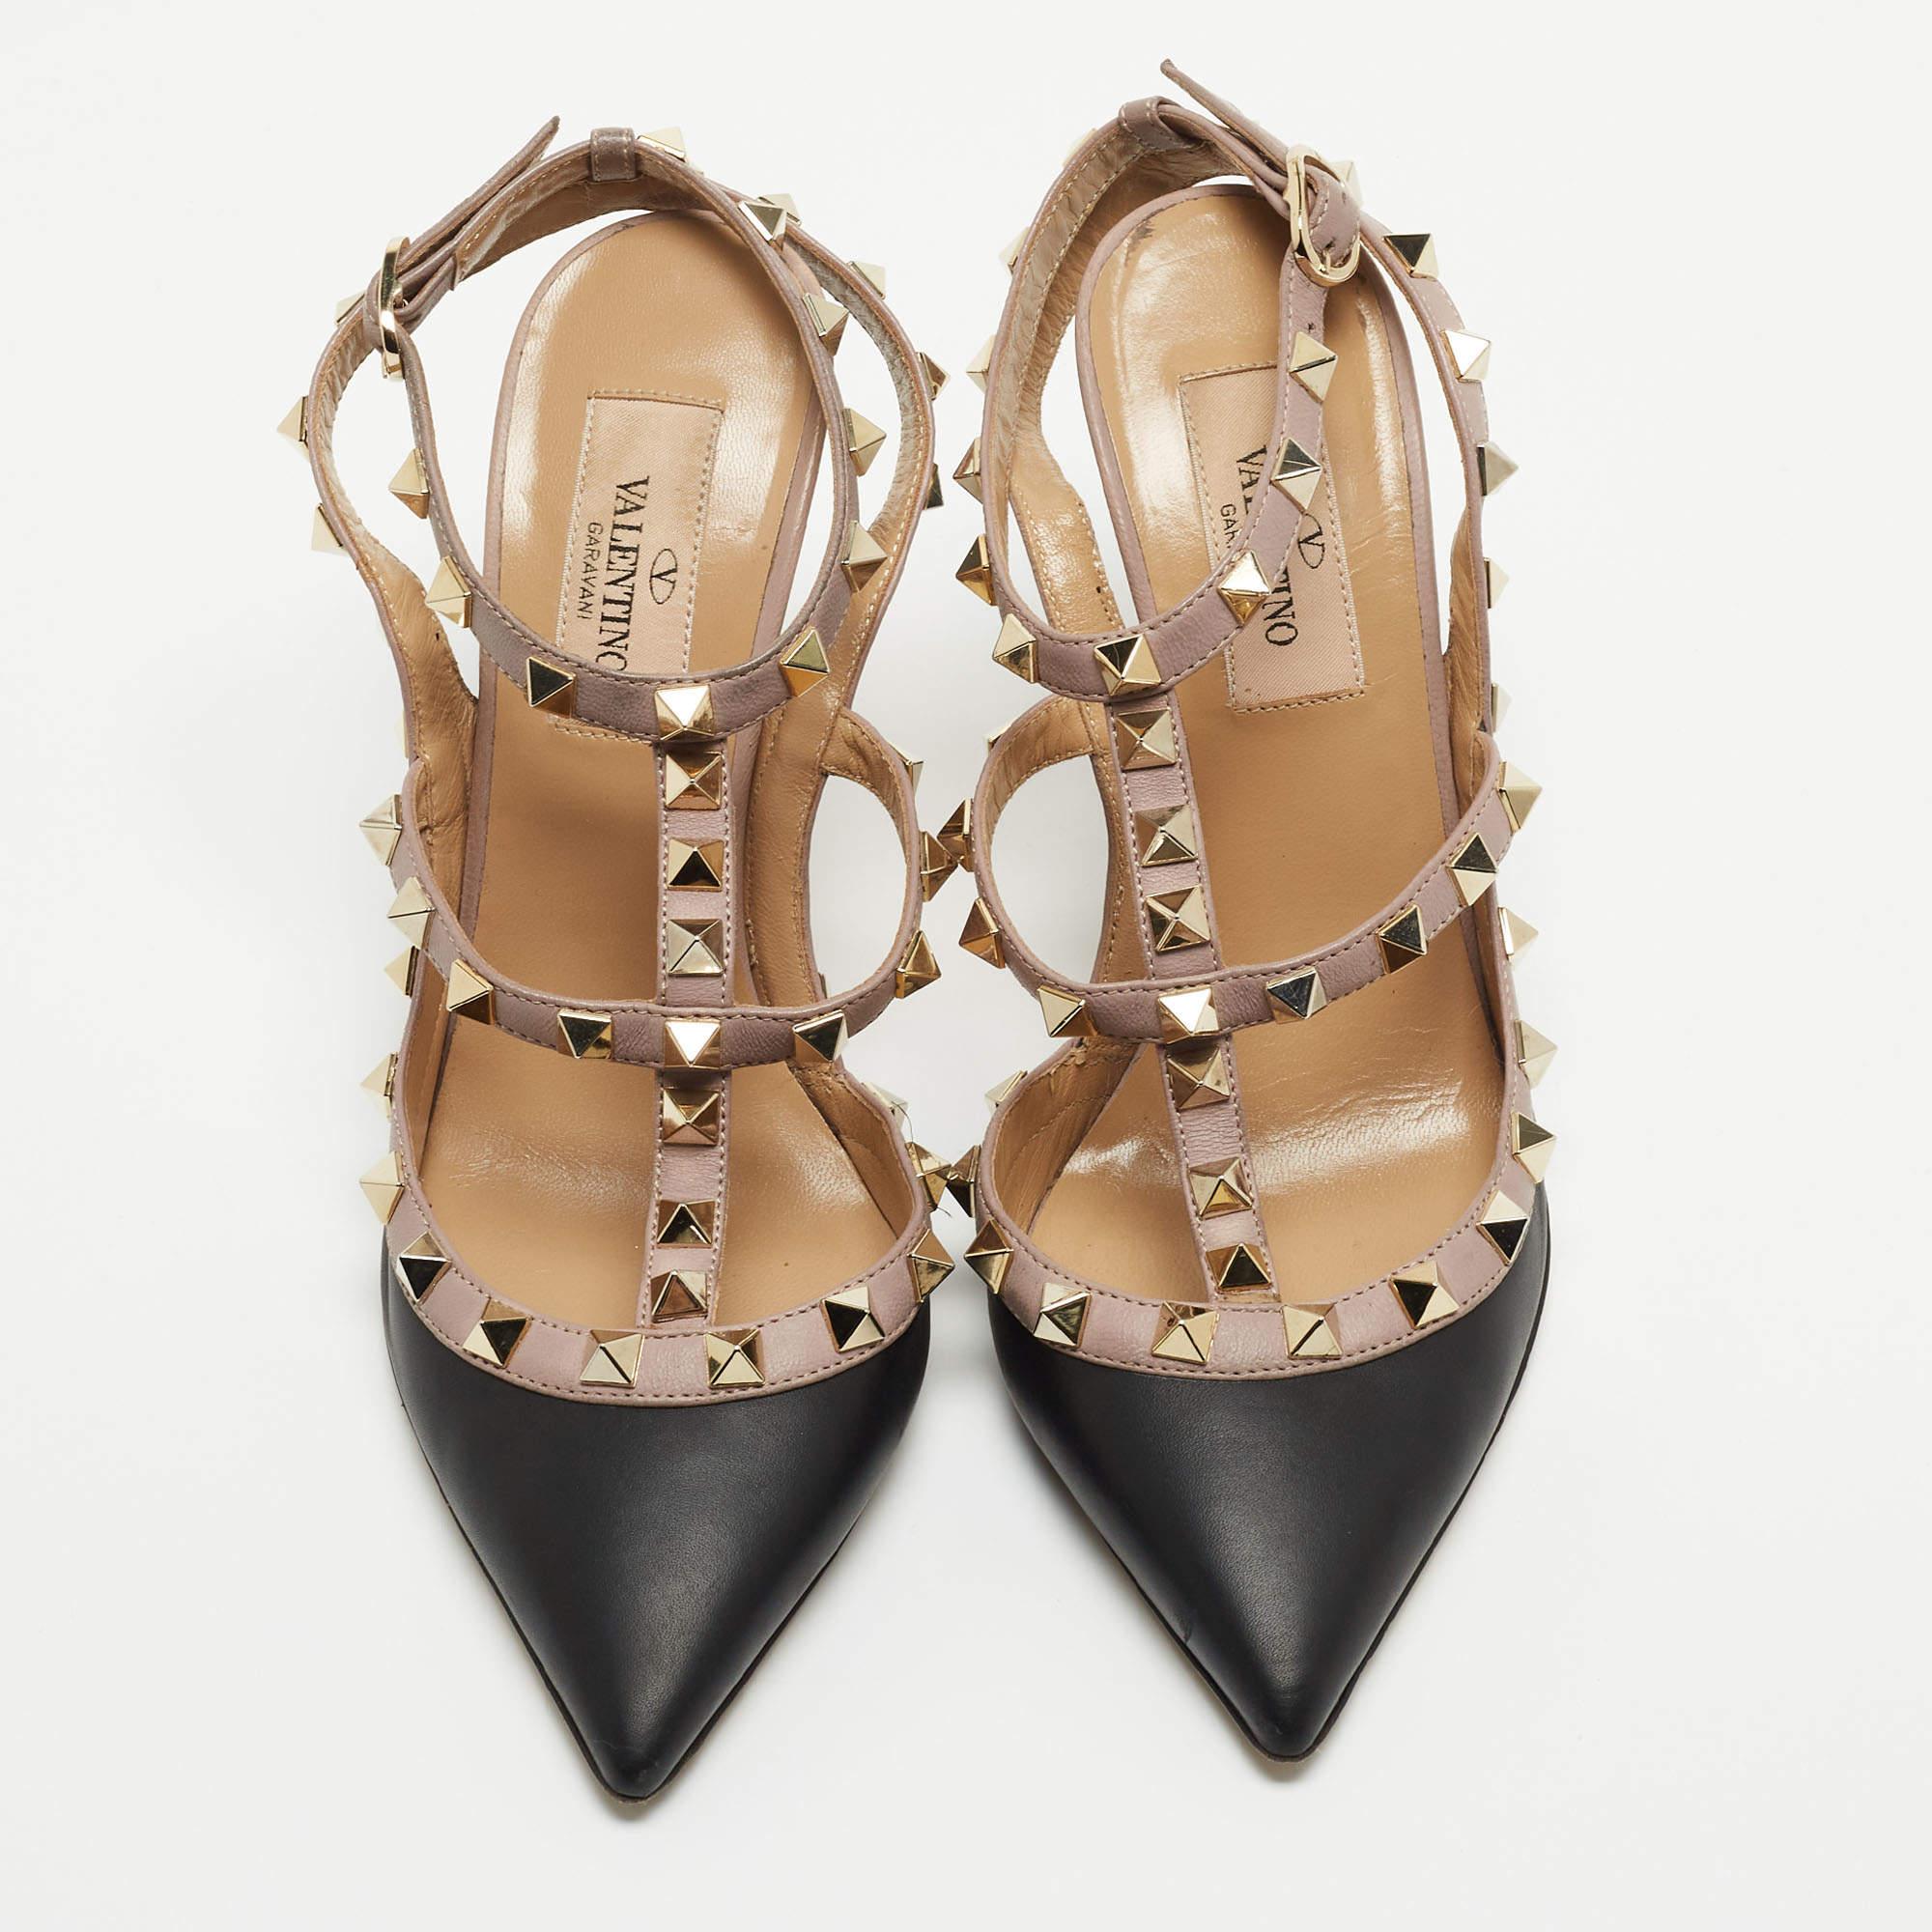 Women's Valentino Black/Beige Leather Rockstud Strappy Pointed Toe Pumps